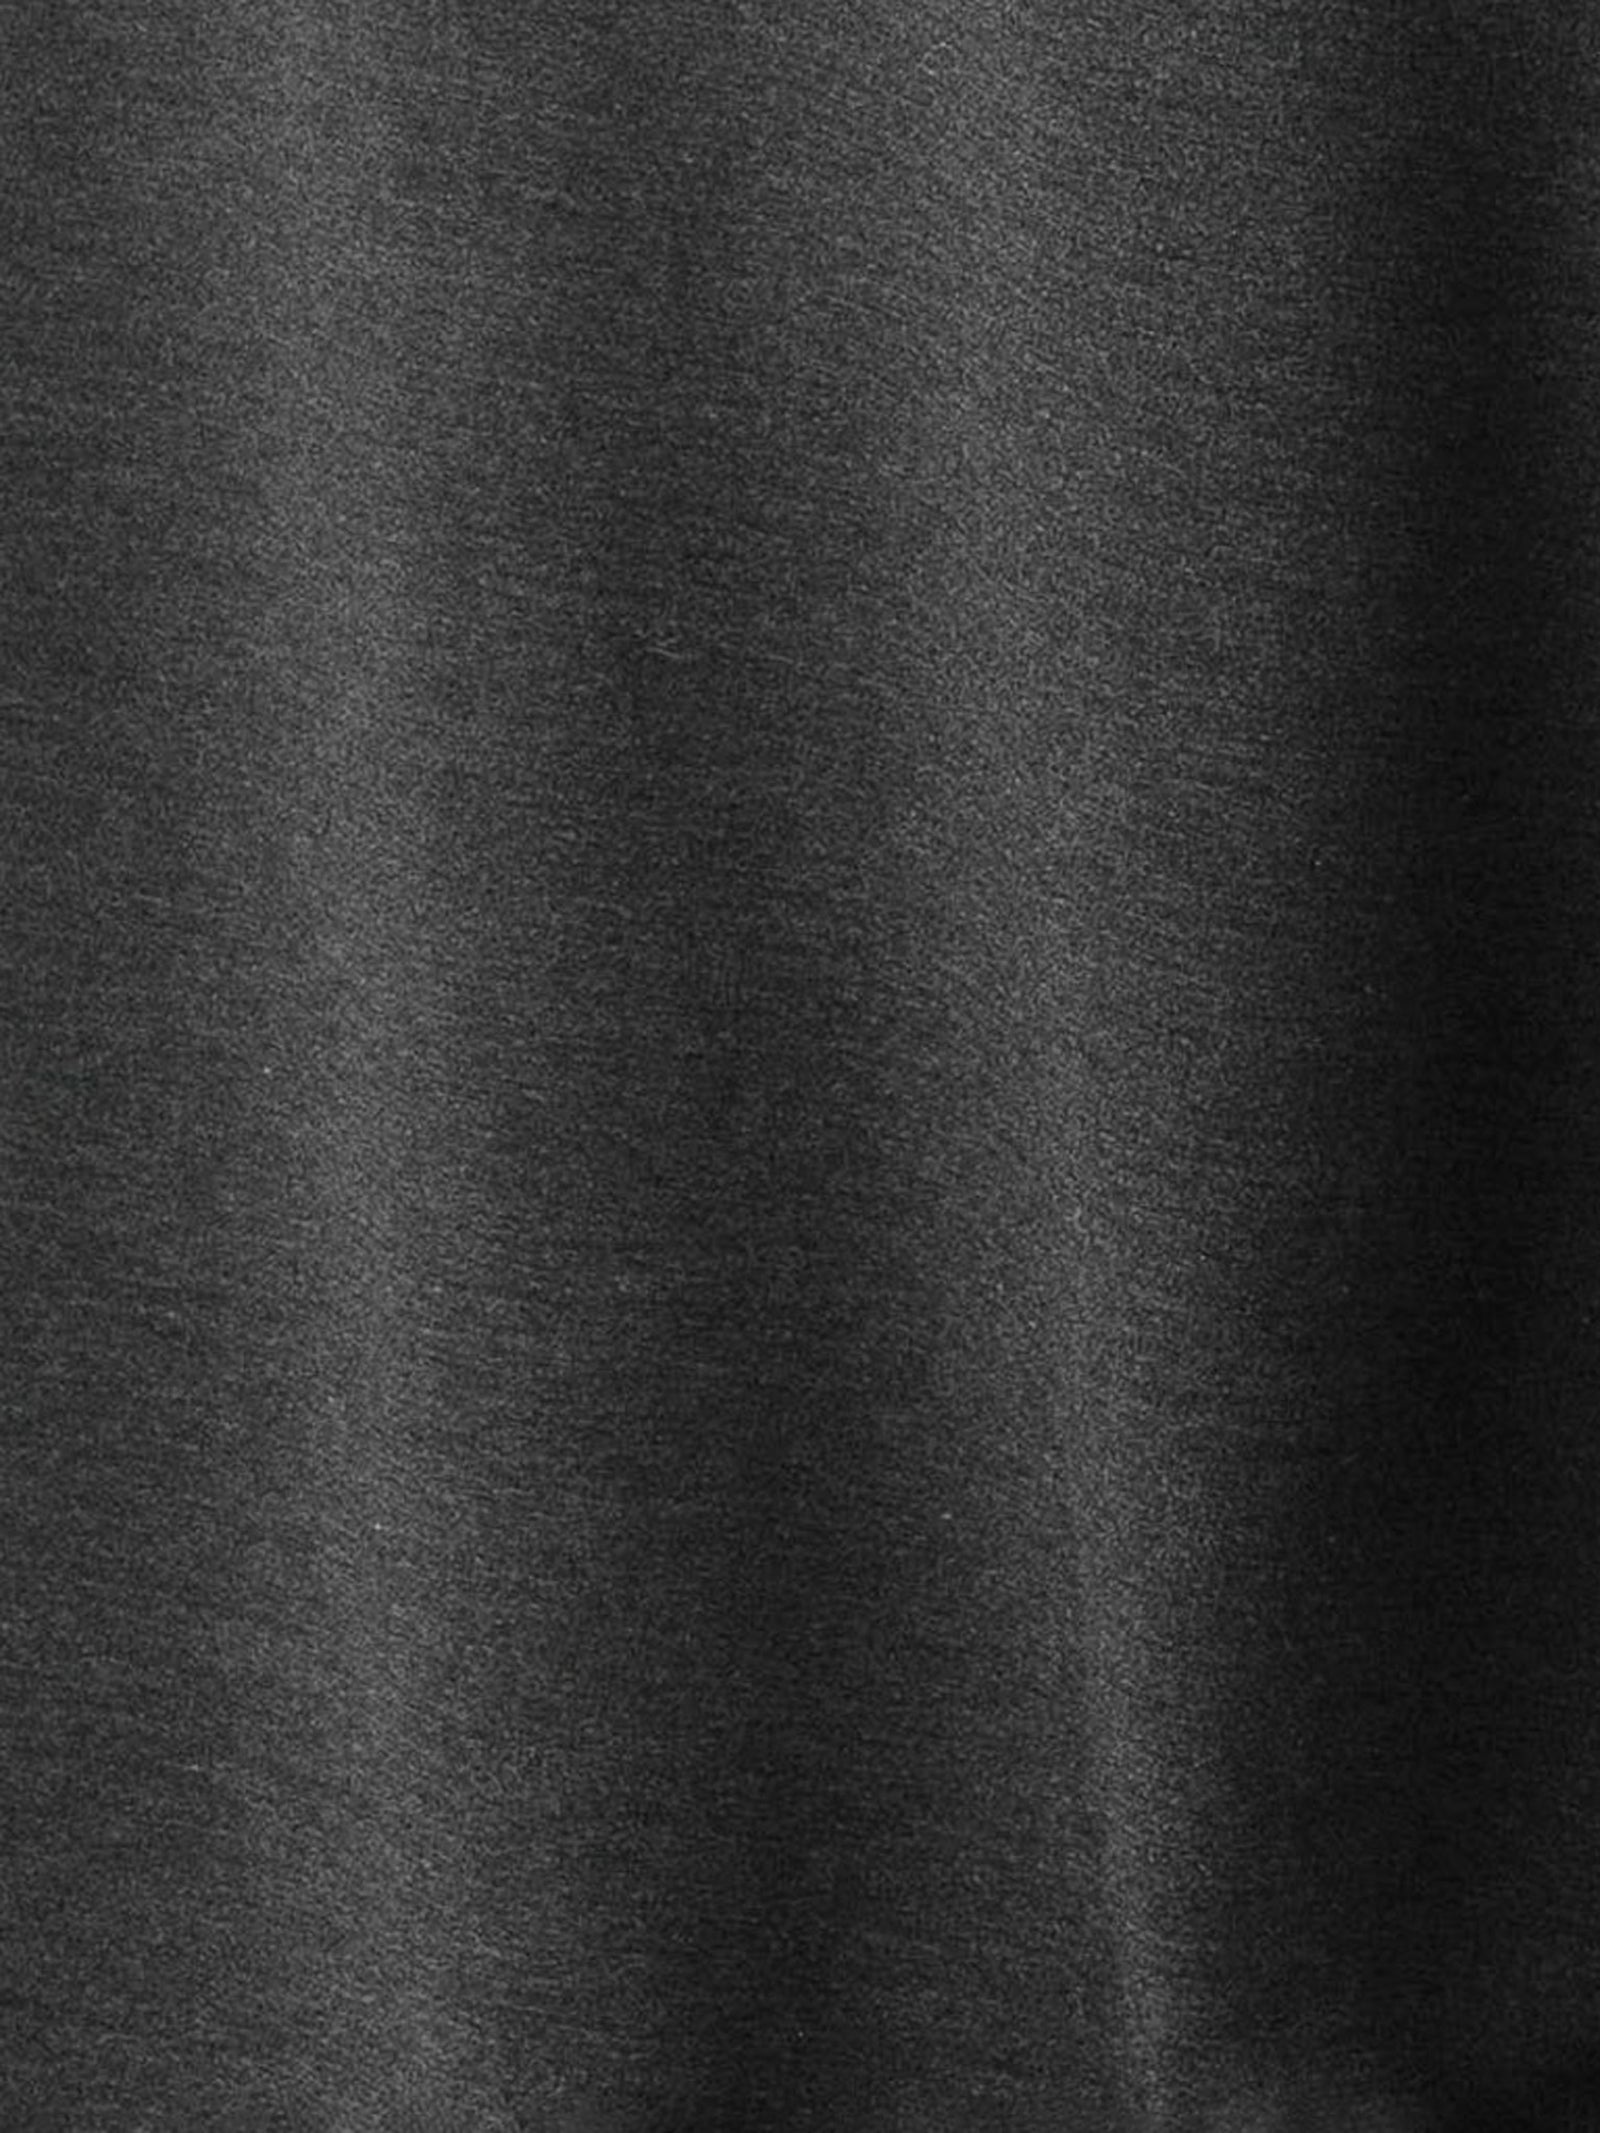 Charcoal Men's Stretch-Knit Bamboo Lounge Tee. The photo is taken close up so as to better show the texture of the material.